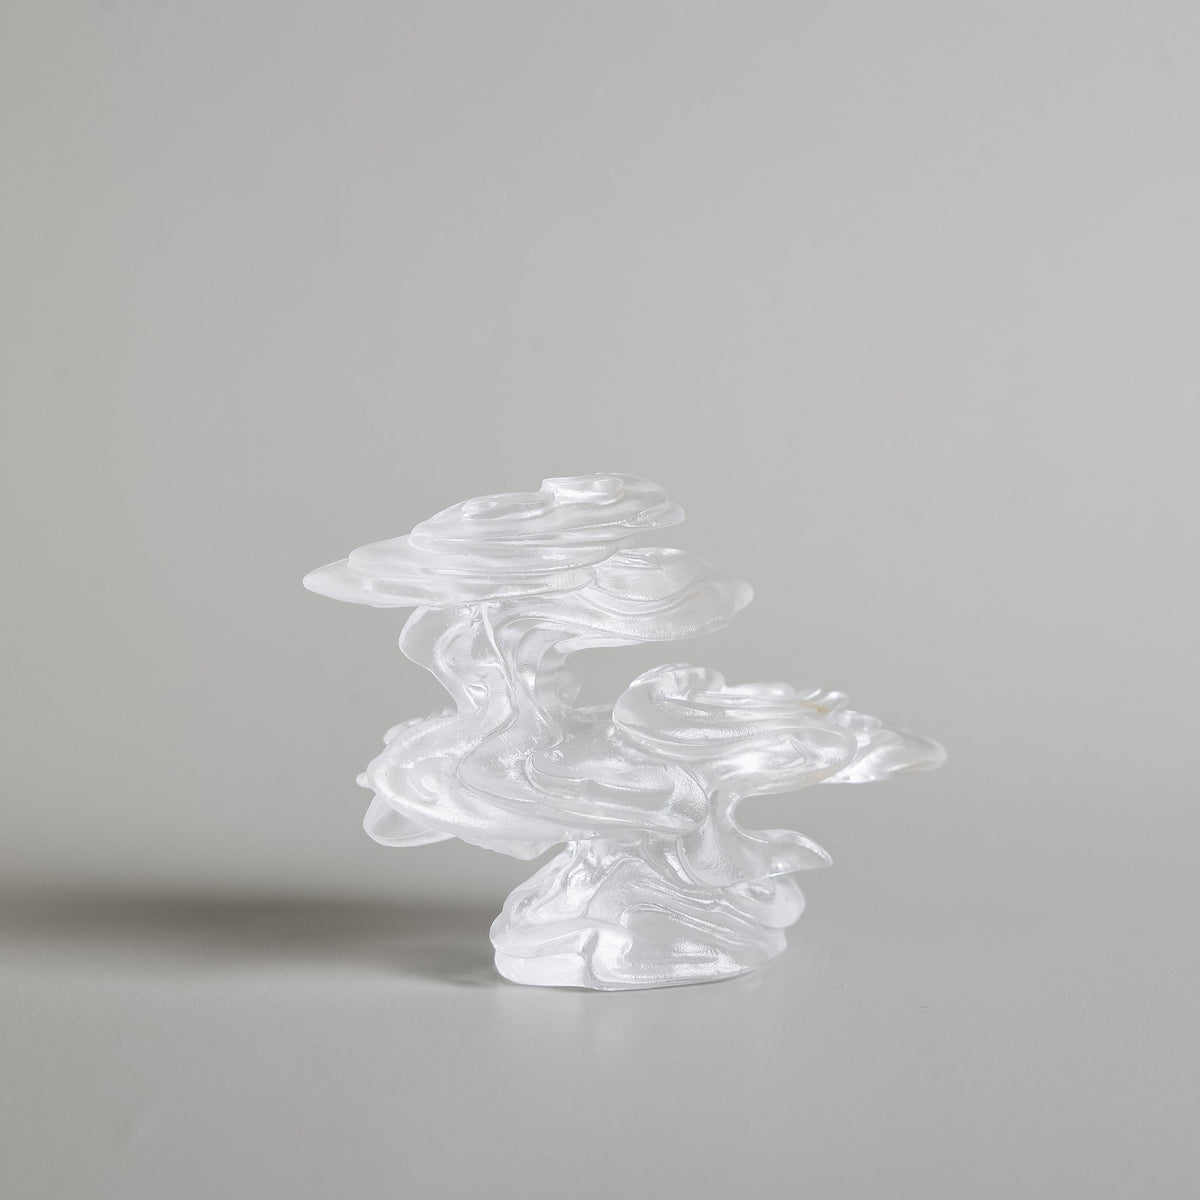 Alternate side view of Ethereal Clouds liuli crystal incense holder